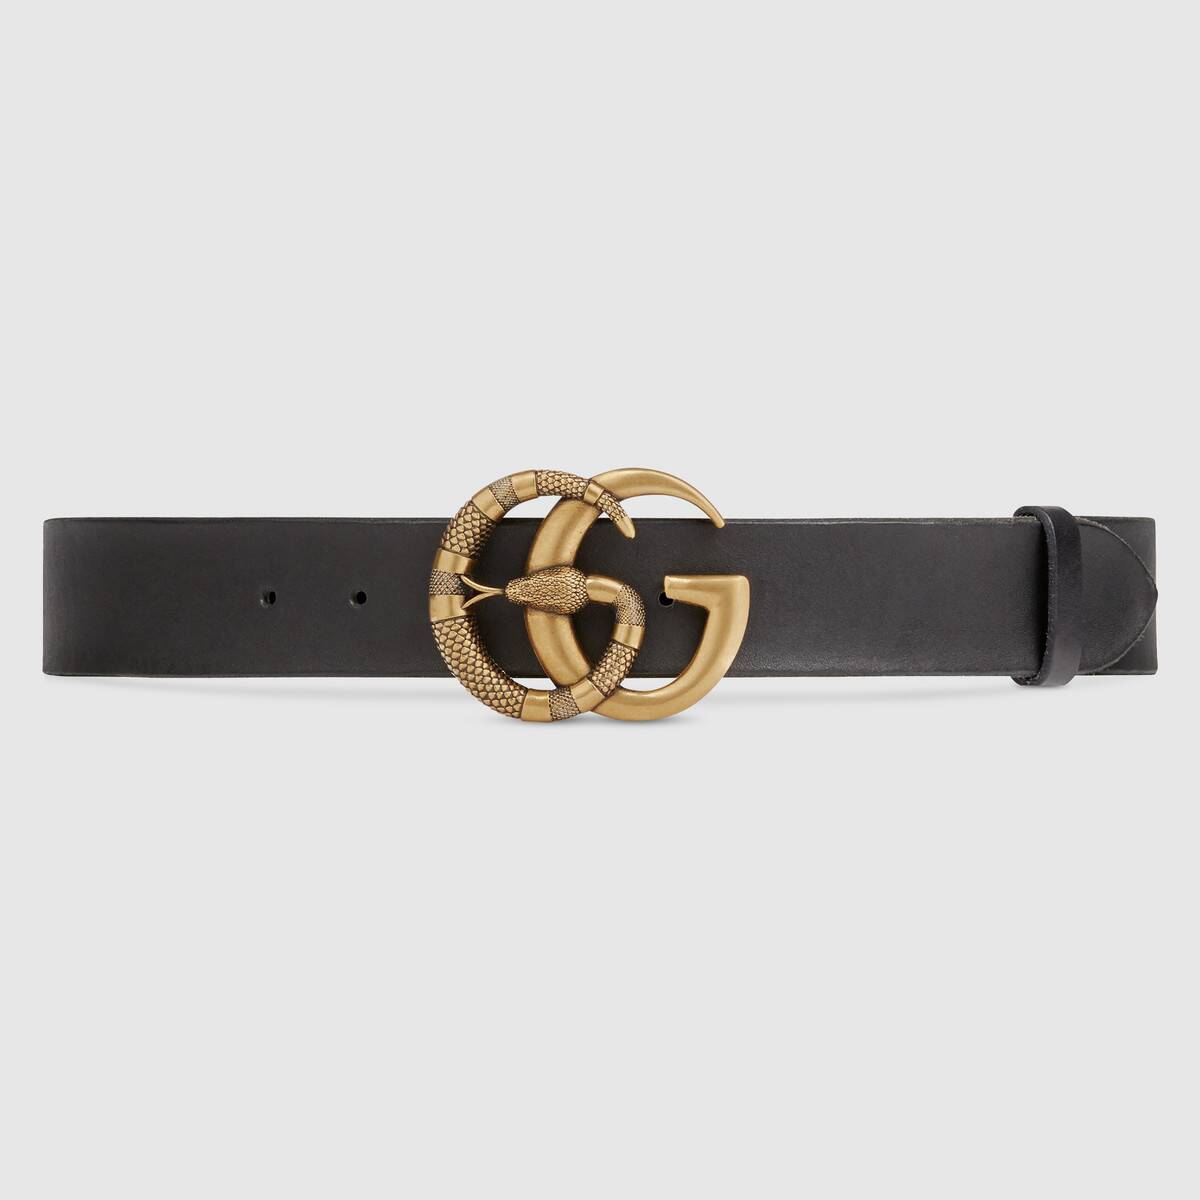 GUCCI BELT SIZES & STYLING GUIDE - GUCCI BELT REVIEW